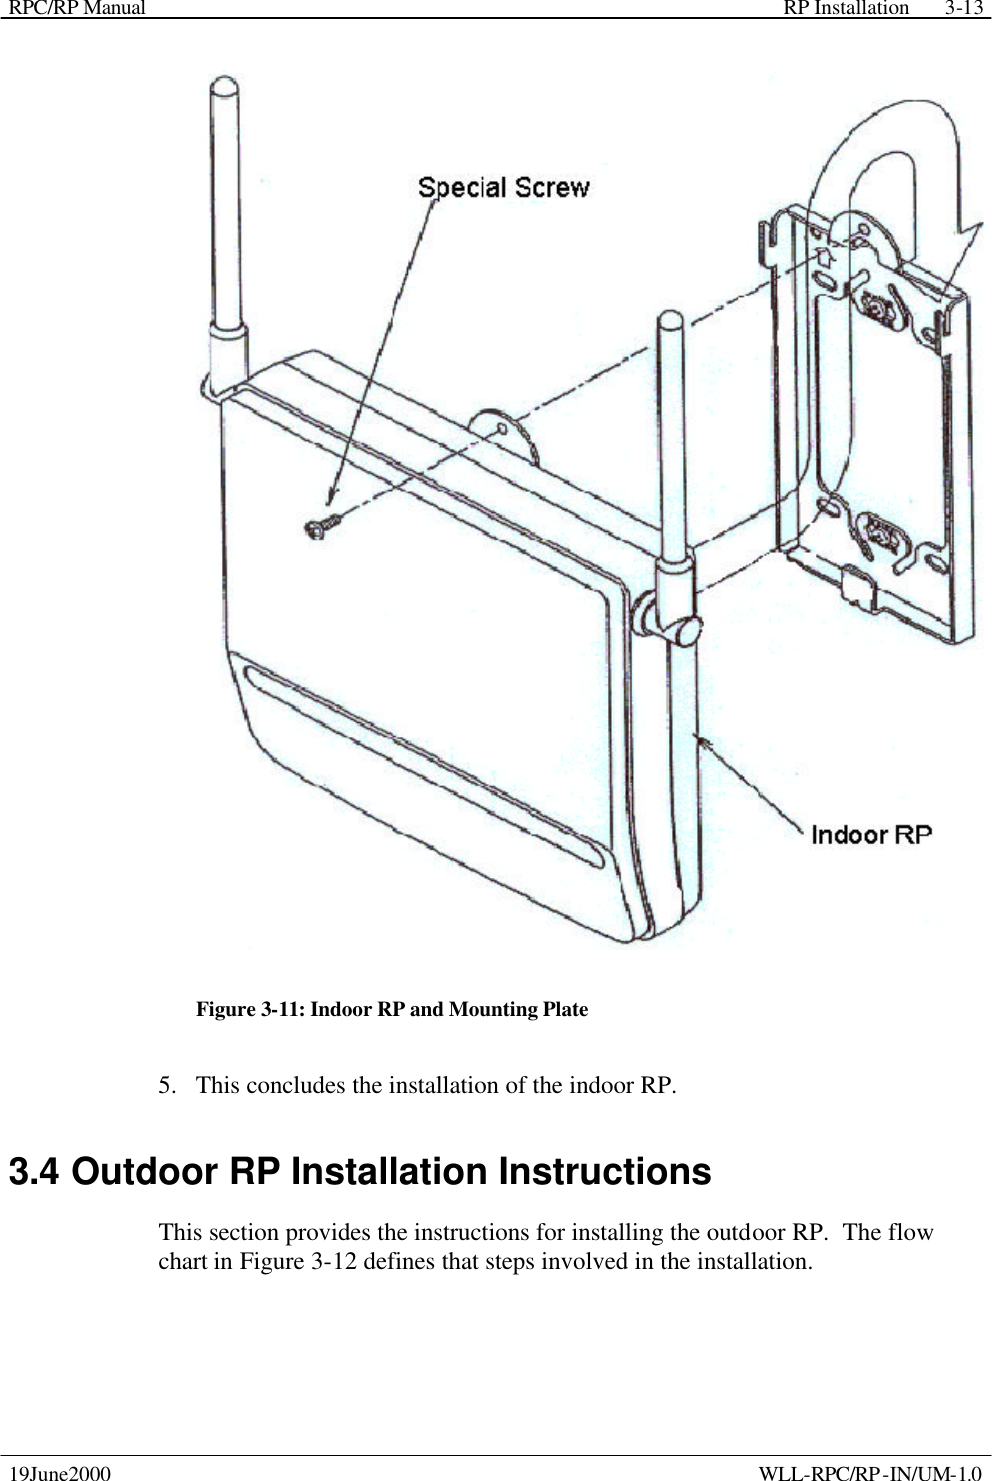 RPC/RP Manual    RP Installation  19June2000    WLL-RPC/RP-IN/UM-1.0 3-13 Figure 3-11: Indoor RP and Mounting Plate 5.  This concludes the installation of the indoor RP. 3.4 Outdoor RP Installation Instructions This section provides the instructions for installing the outdoor RP.  The flow chart in Figure 3-12 defines that steps involved in the installation. 